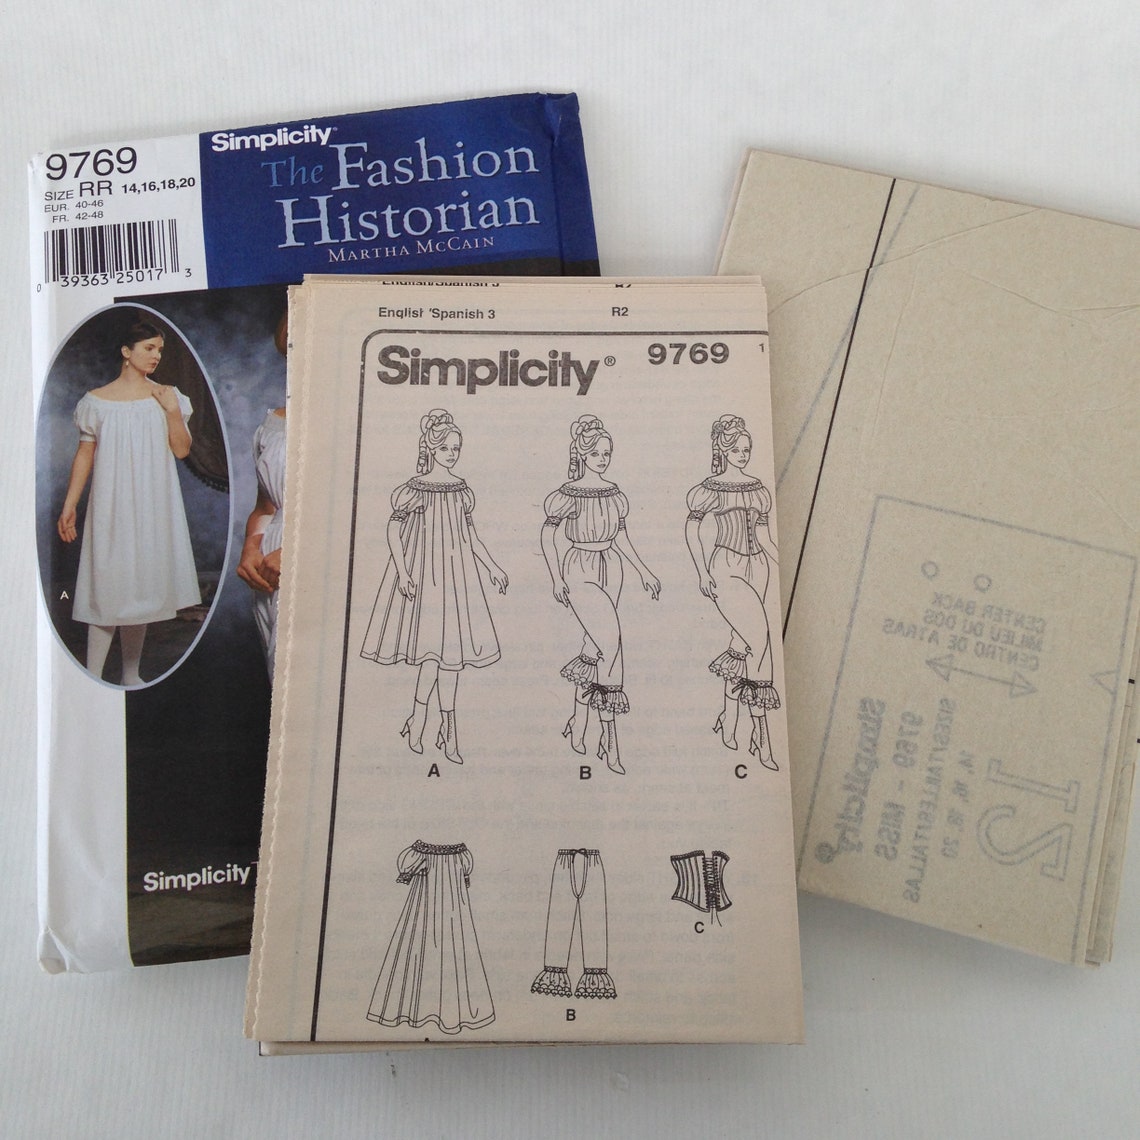 Simplicity 9769 Sewing Pattern UNCUT the Fashion Historian | Etsy